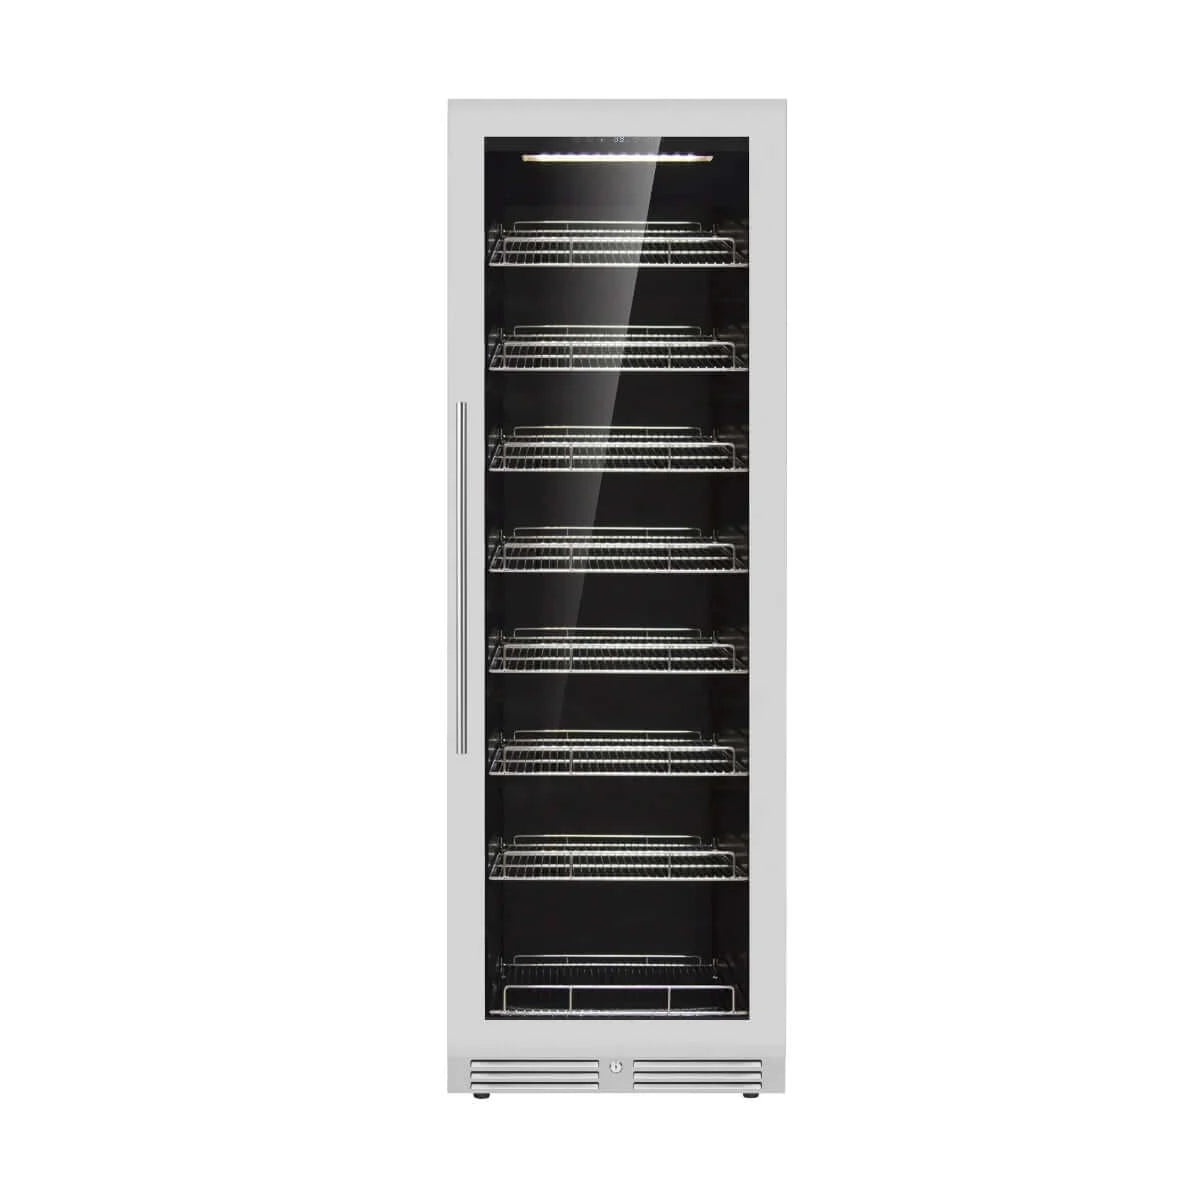 KingsBottle Large Beverage Refrigerator With Low-E Glass Door With Stainless Steel Trim